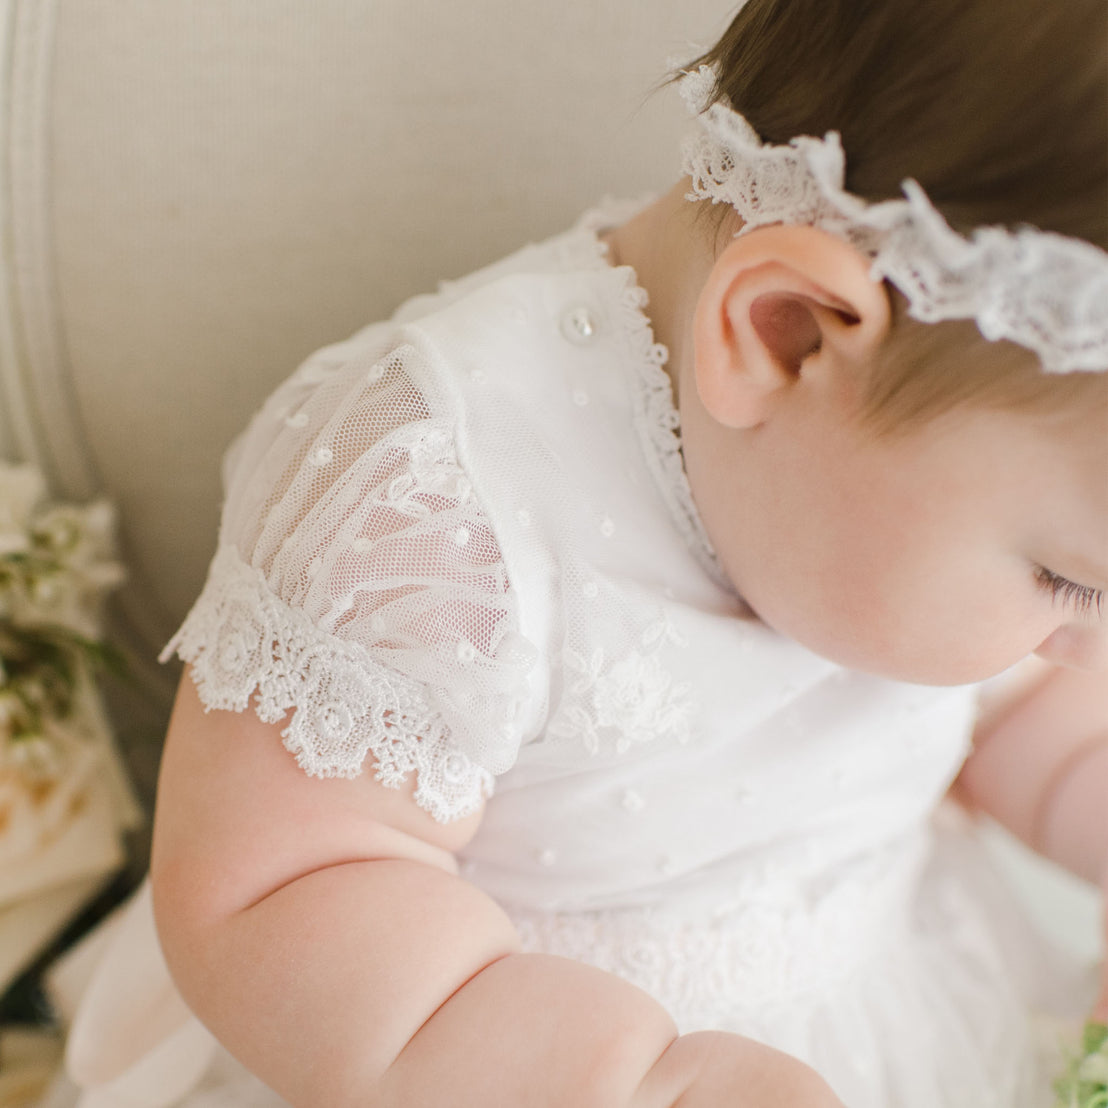 A close-up of a baby wearing the Melissa Romper Dress, a delicate white lace dress with intricate details, focused on the sleeve and part of the back. The baby's gaze is directed downwards.